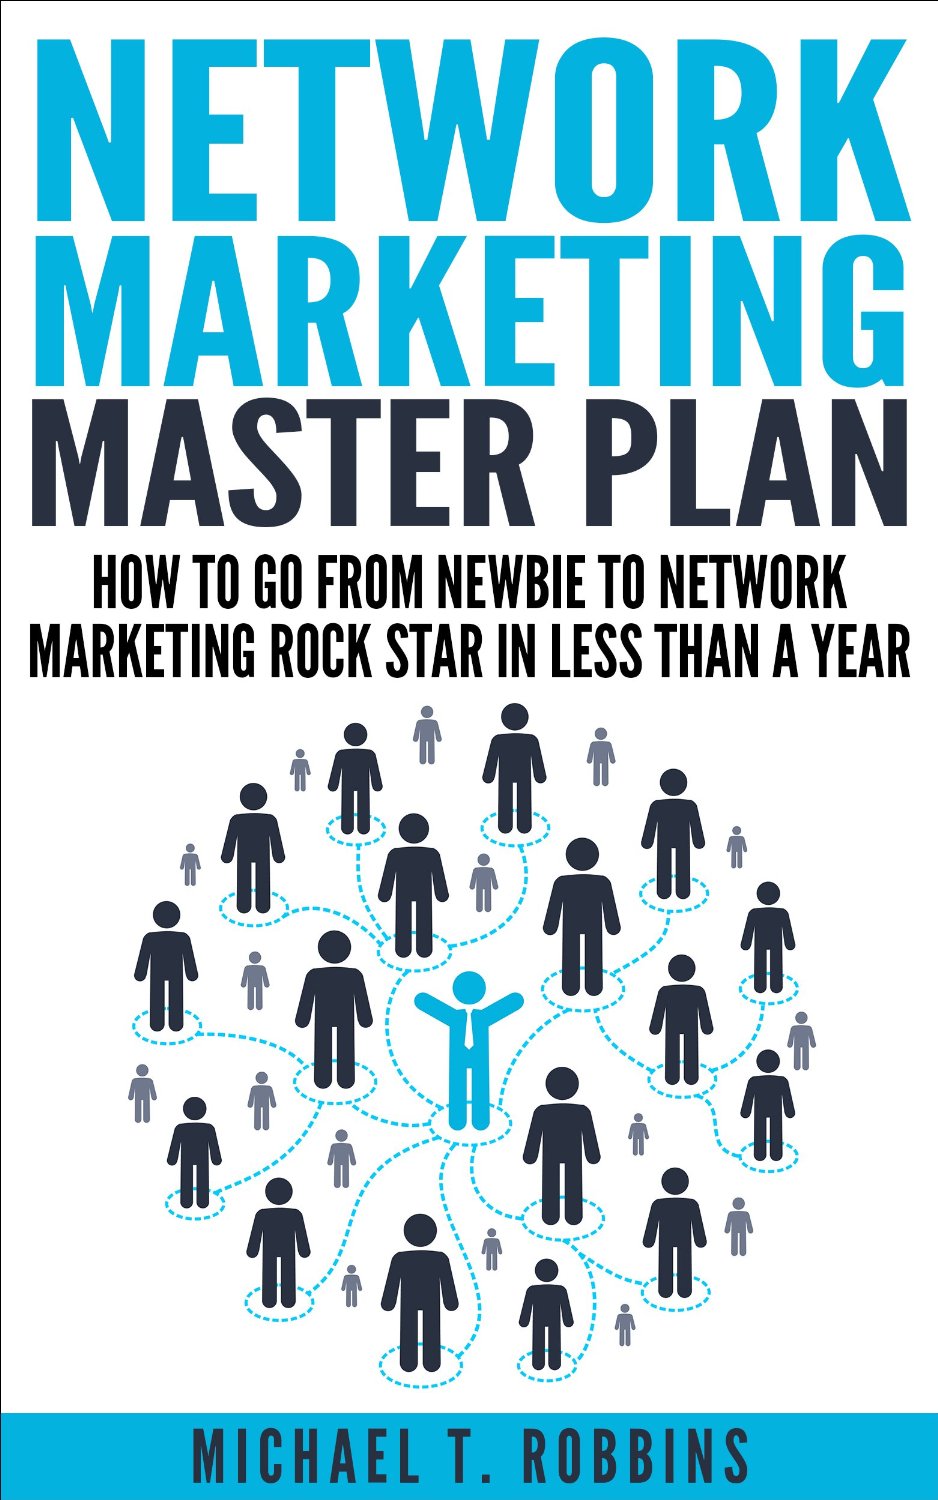 Network Marketing: Master Plan: How to Go From Newbie to Network Marketing Rock Star in Less Than a Year by Michael T. Robbins